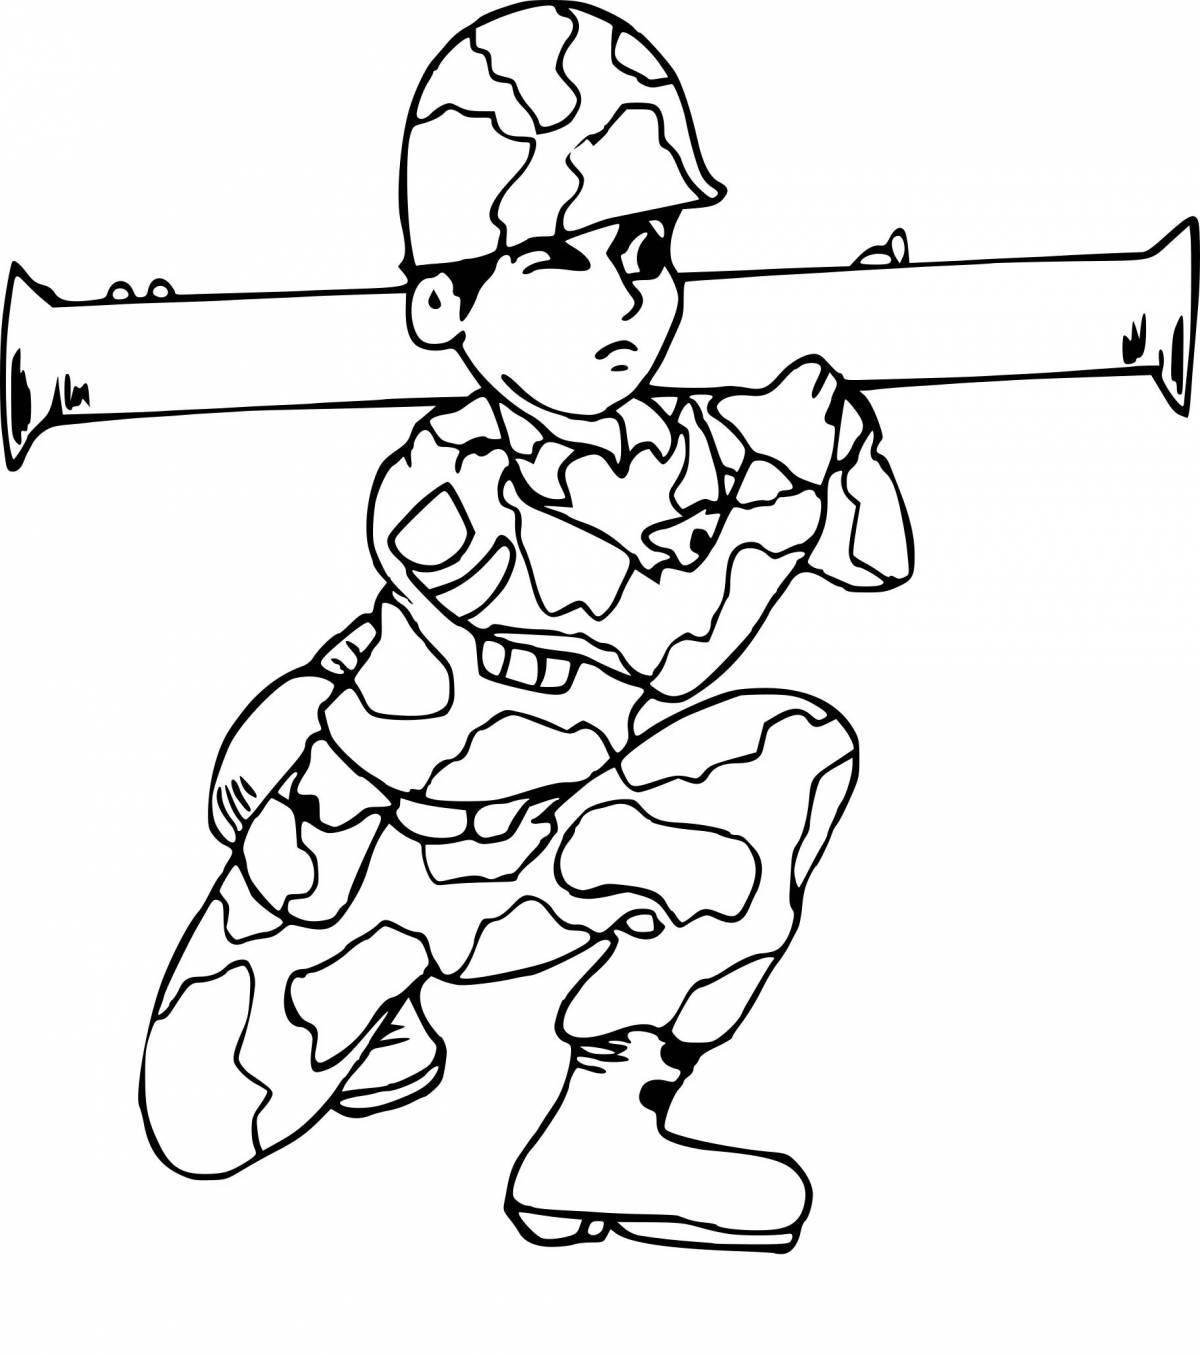 Adorable toy soldier coloring book for 3-4 year olds